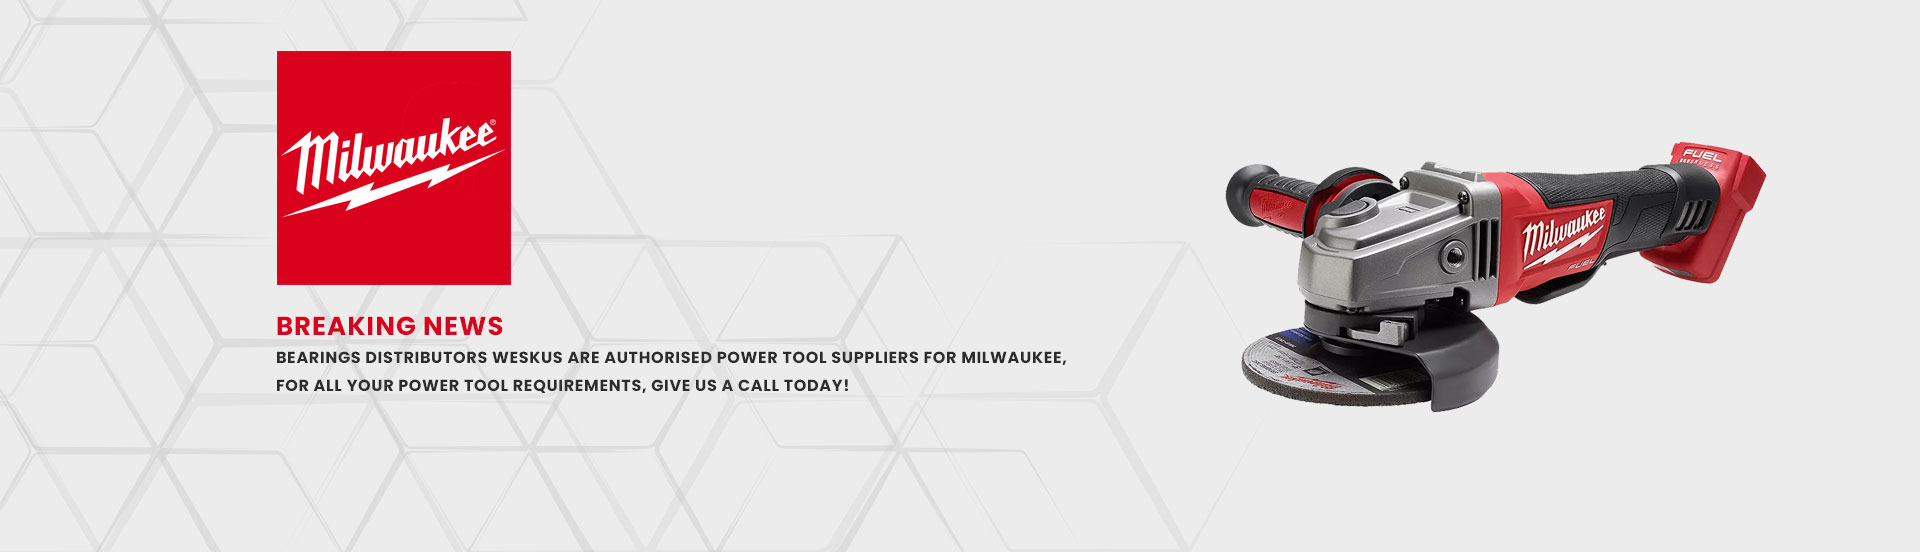 BD Weksus is a distributor of Milwaukee Power Tools